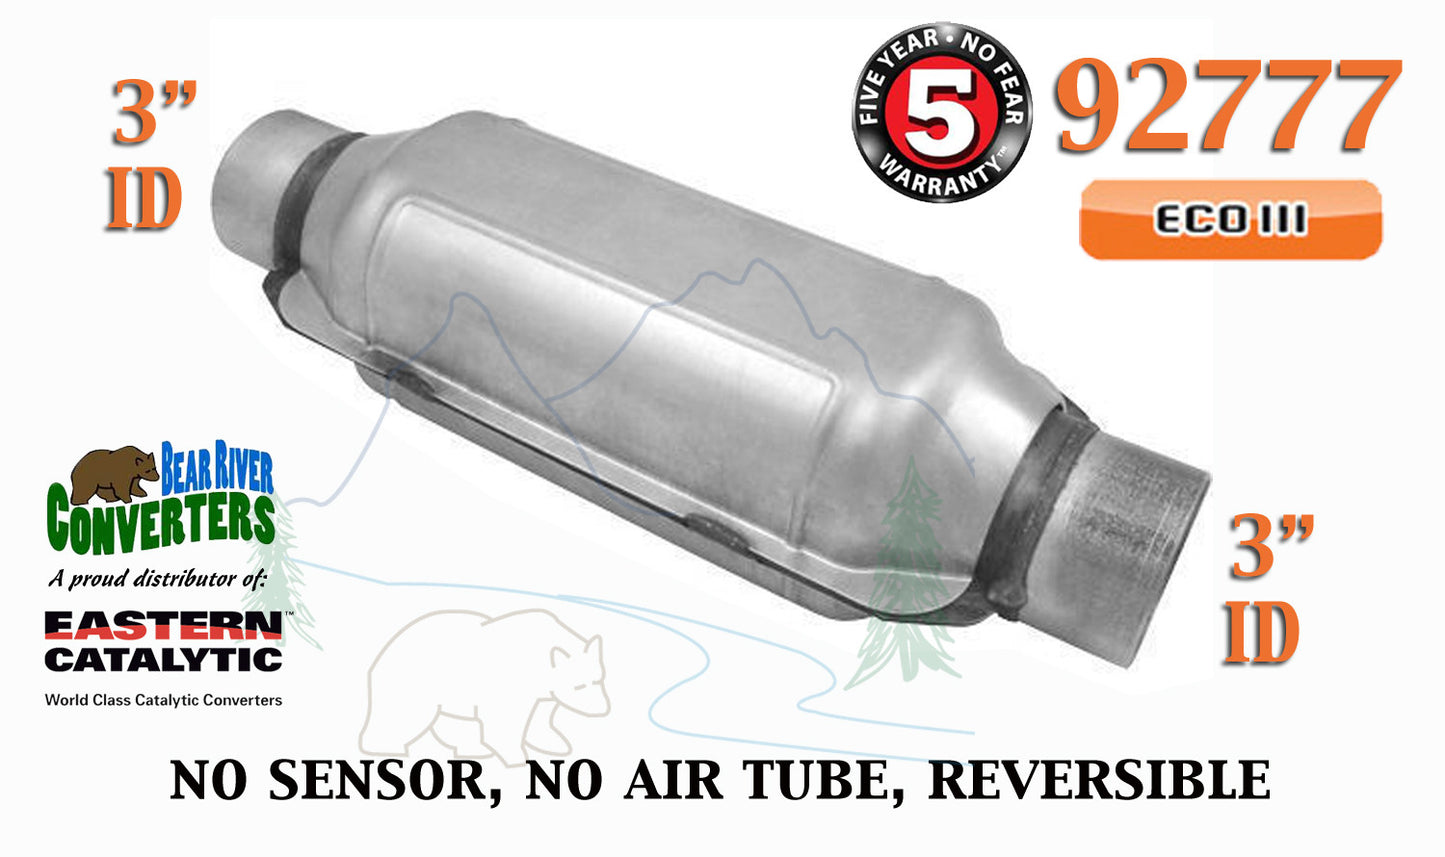 92777 Eastern Universal Catalytic Converter ECO III Catalyst 3” Pipe 12” Body - Bear River Converters